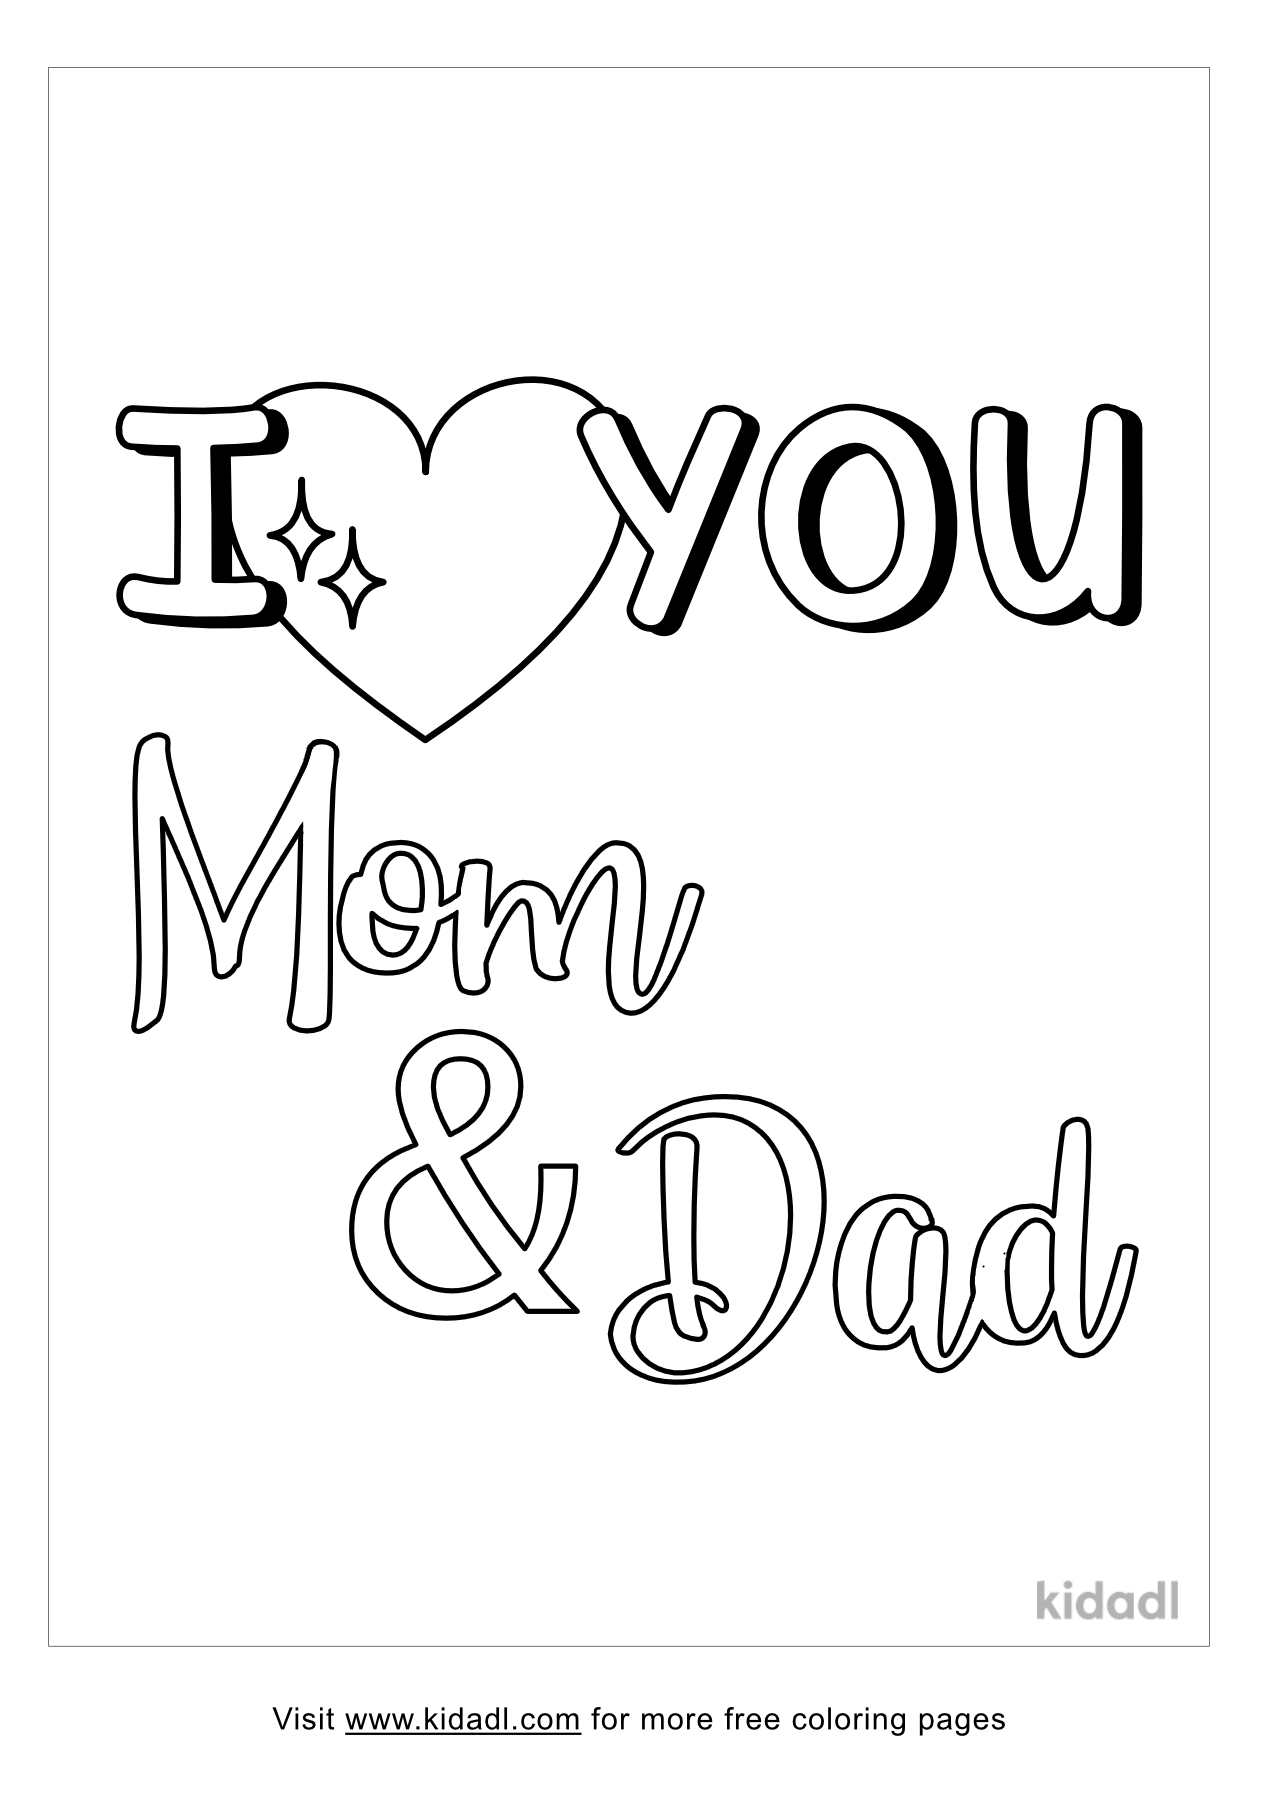 I Love You Mom And Dad Coloring Pages | Free Words & Quotes Coloring Pages  | Kidadl